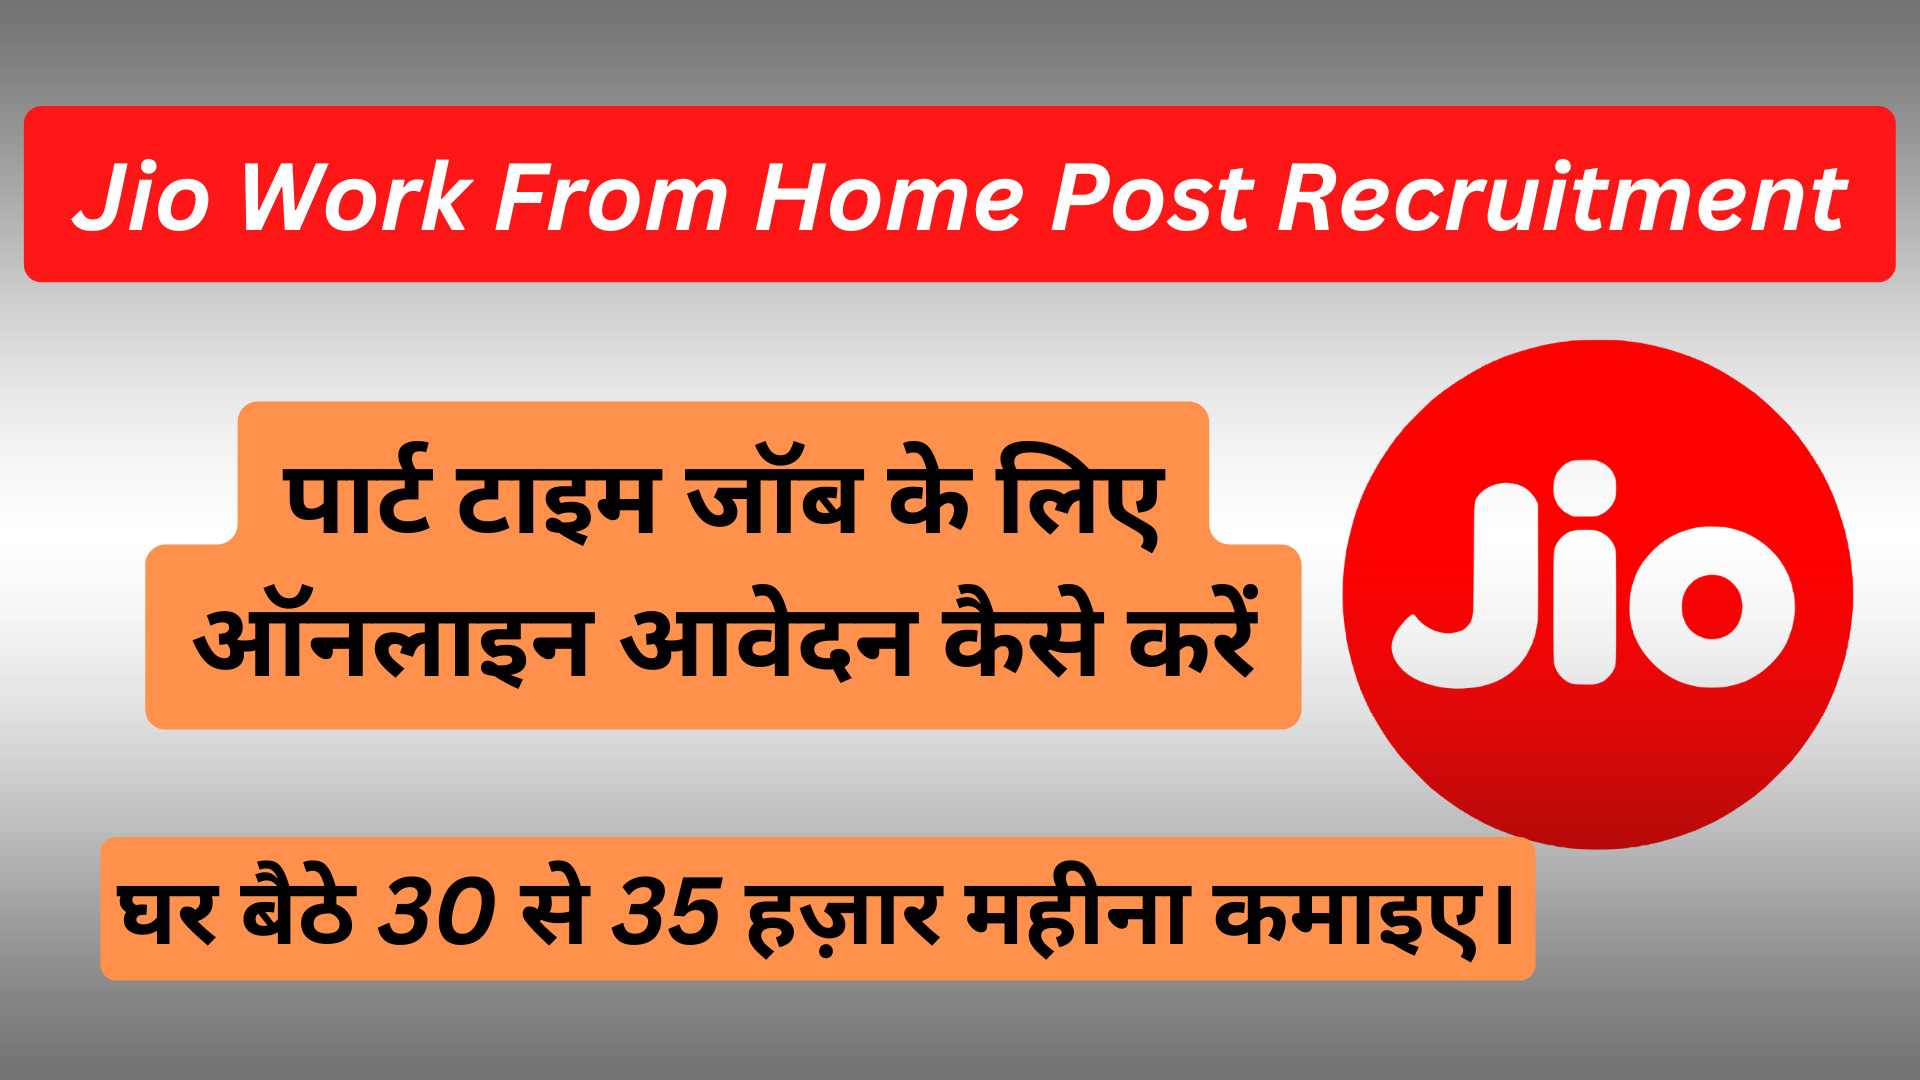 Jio Work From Home Post Recruitment 2022 Online Apply Kaise kare